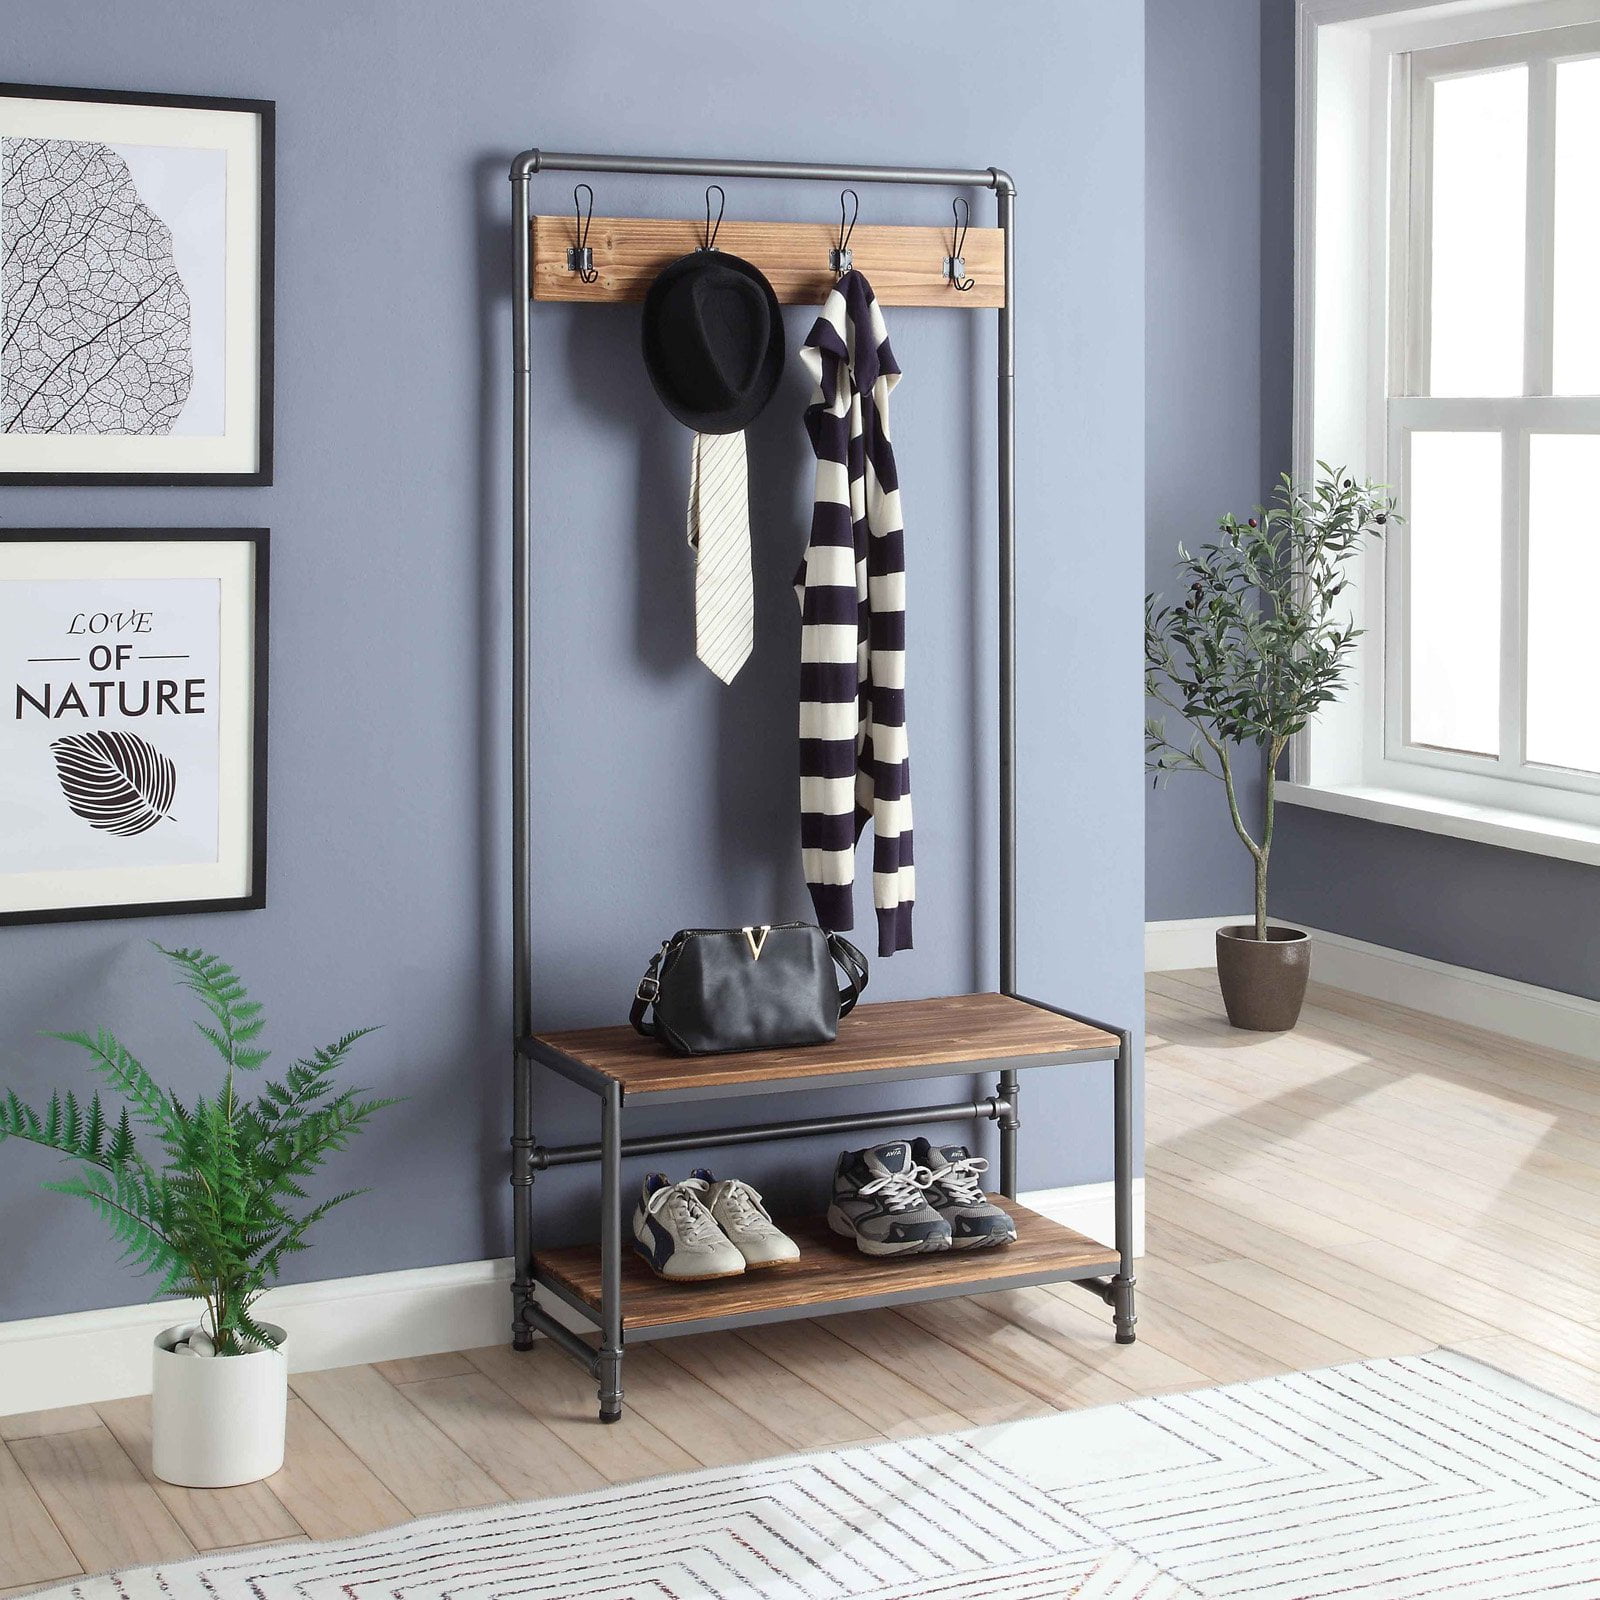 621123 Anacortes Hall Tree - Black Pipe With Brown Shelves